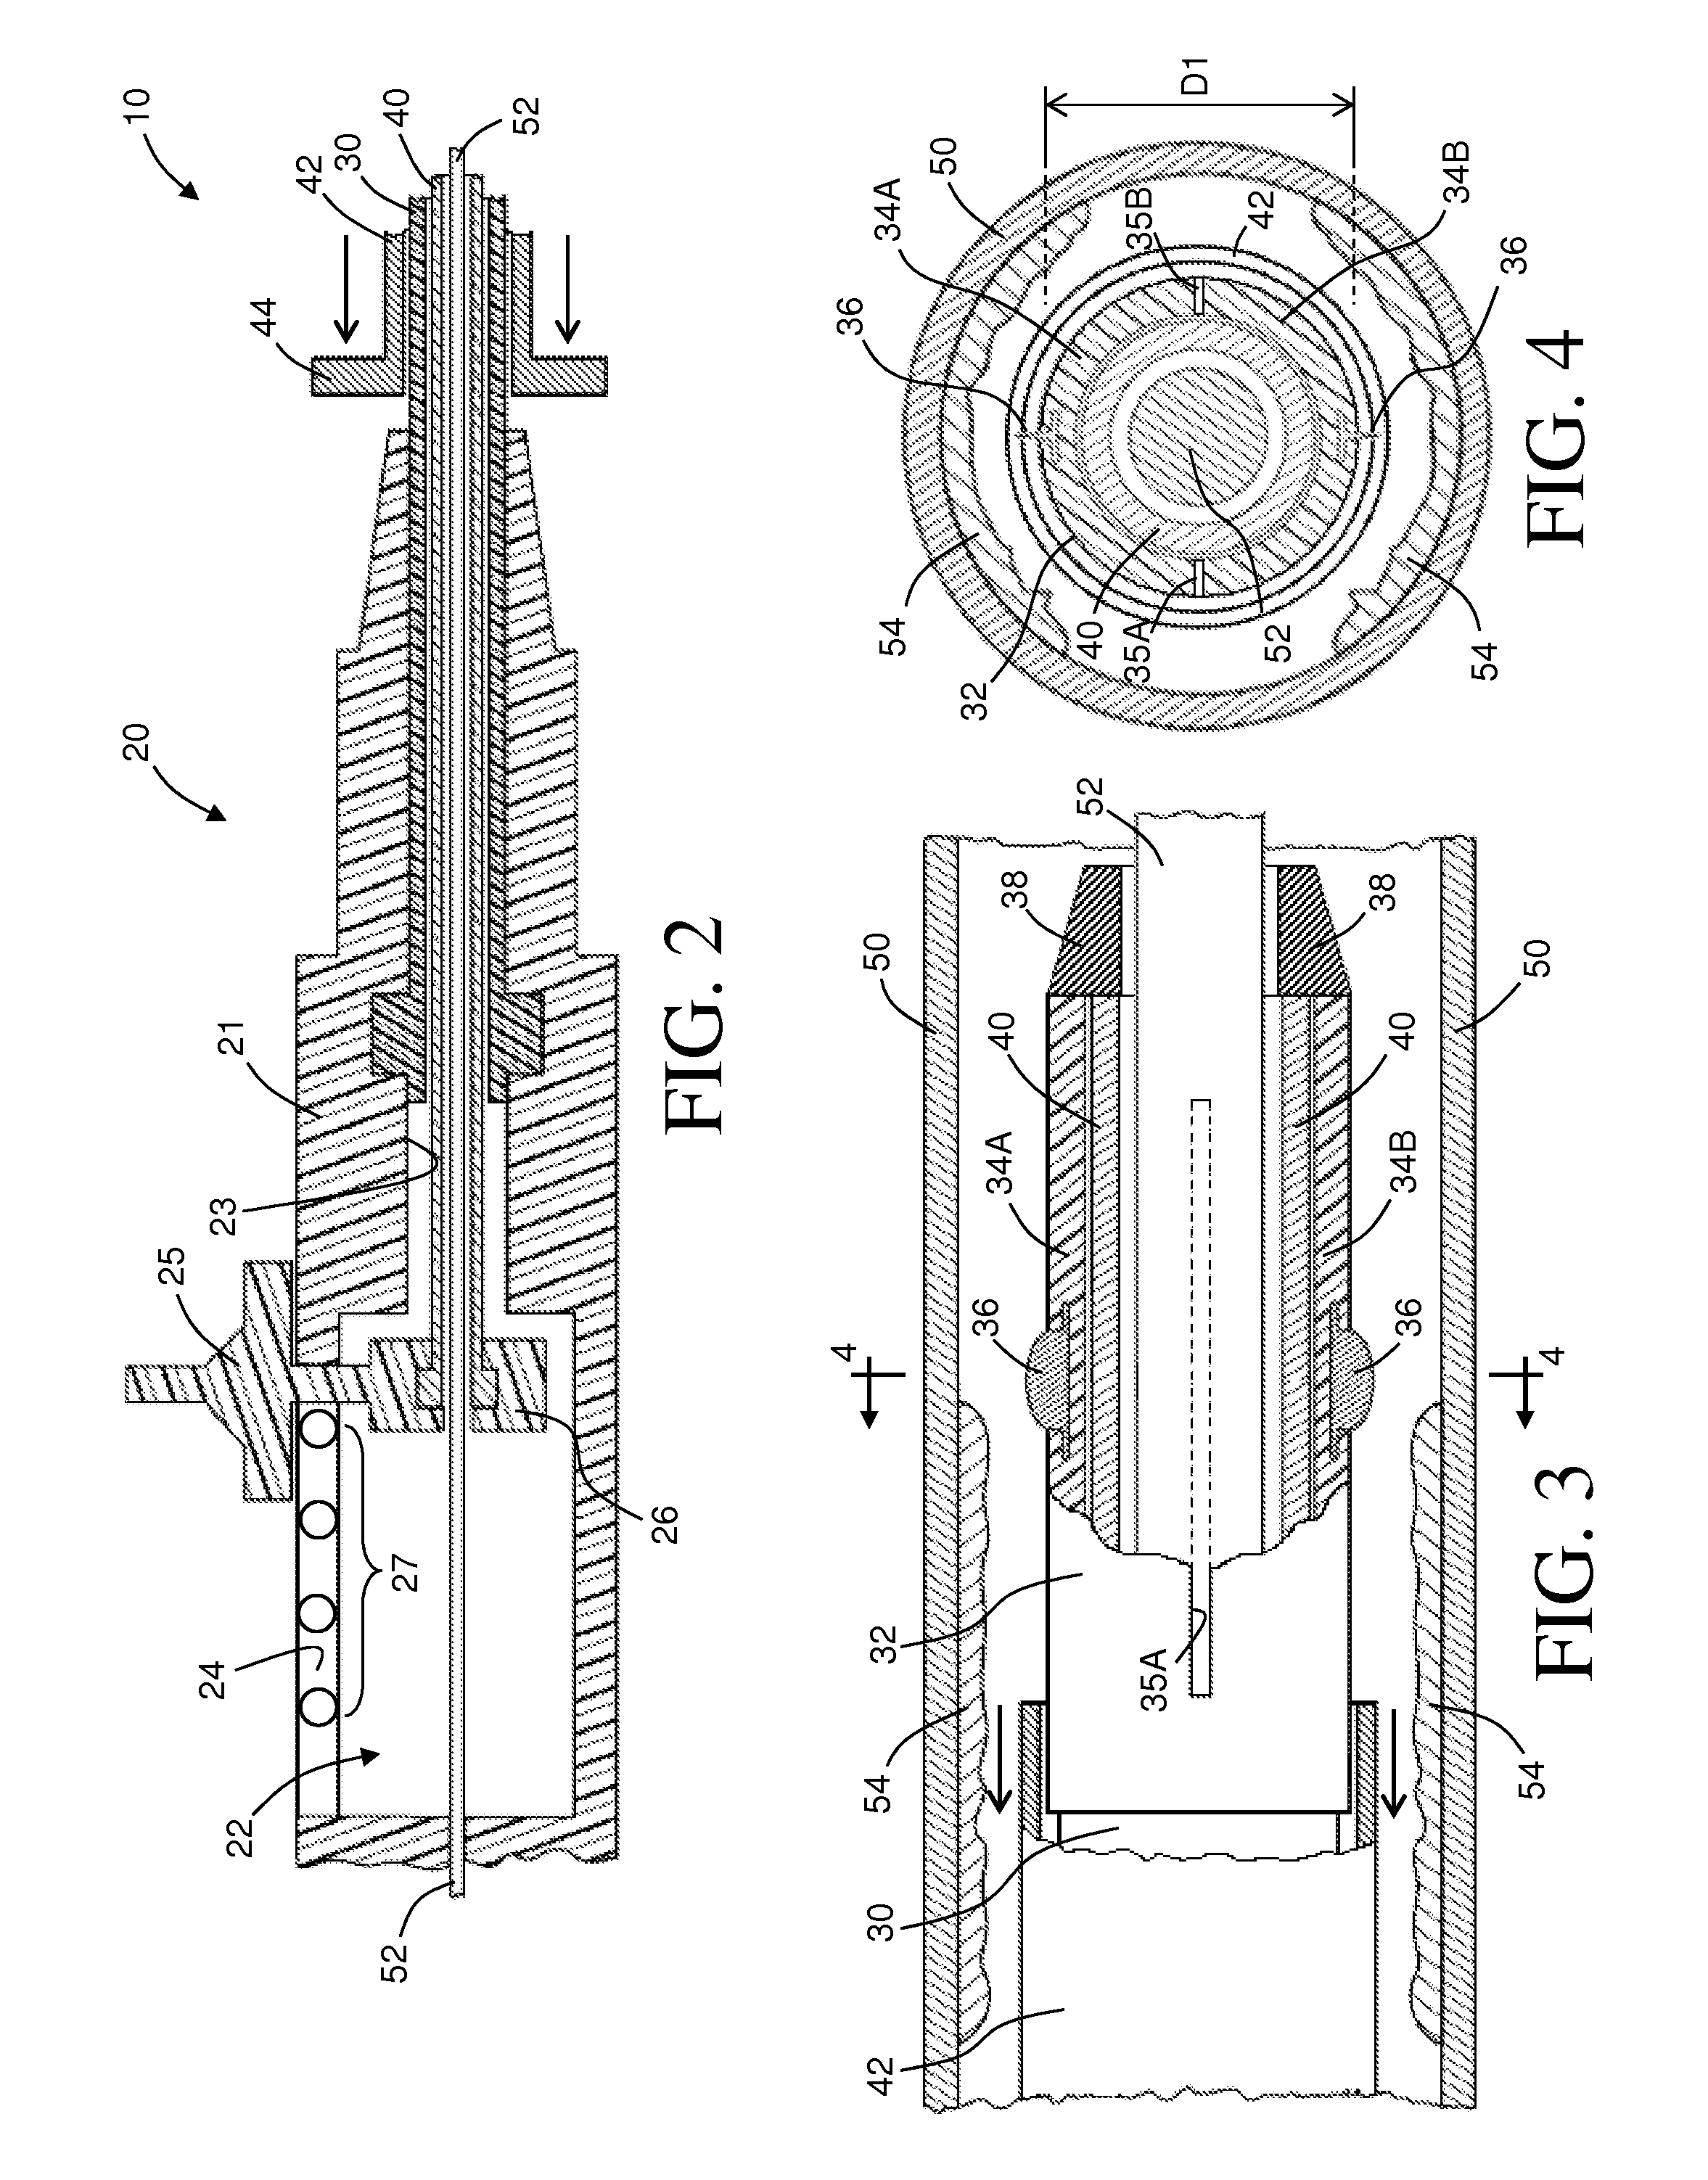 Intravascular Catheter Having An Expandable Incising Portion